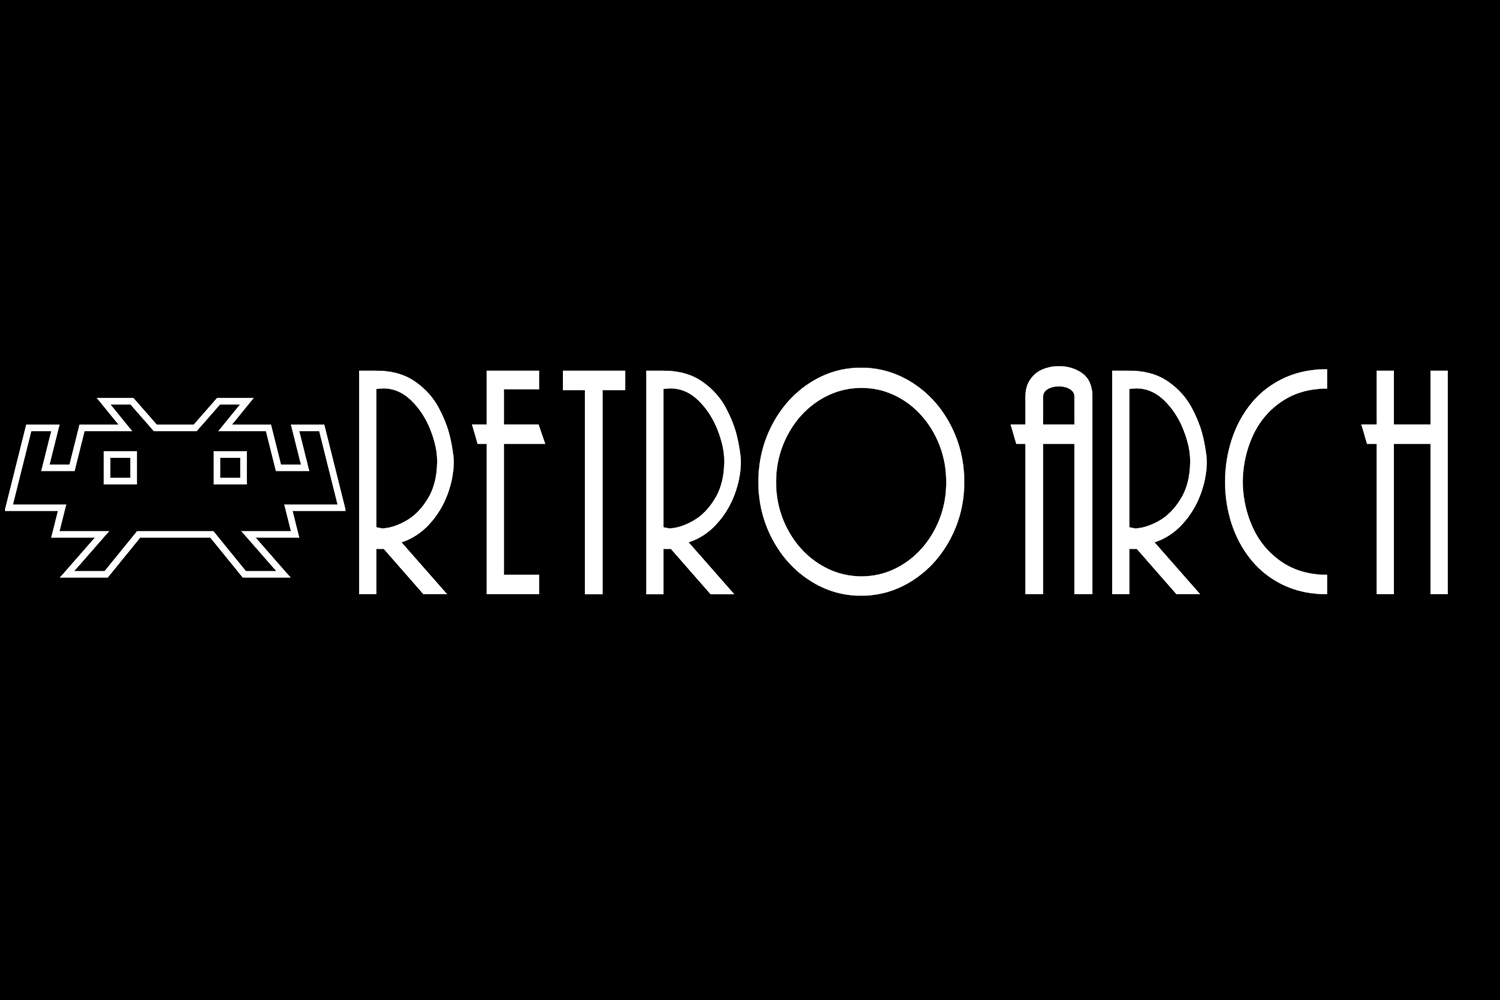 6 Sites to Play Retro Games Online For Free - Premier Online Updates,  Latest Tech Trends